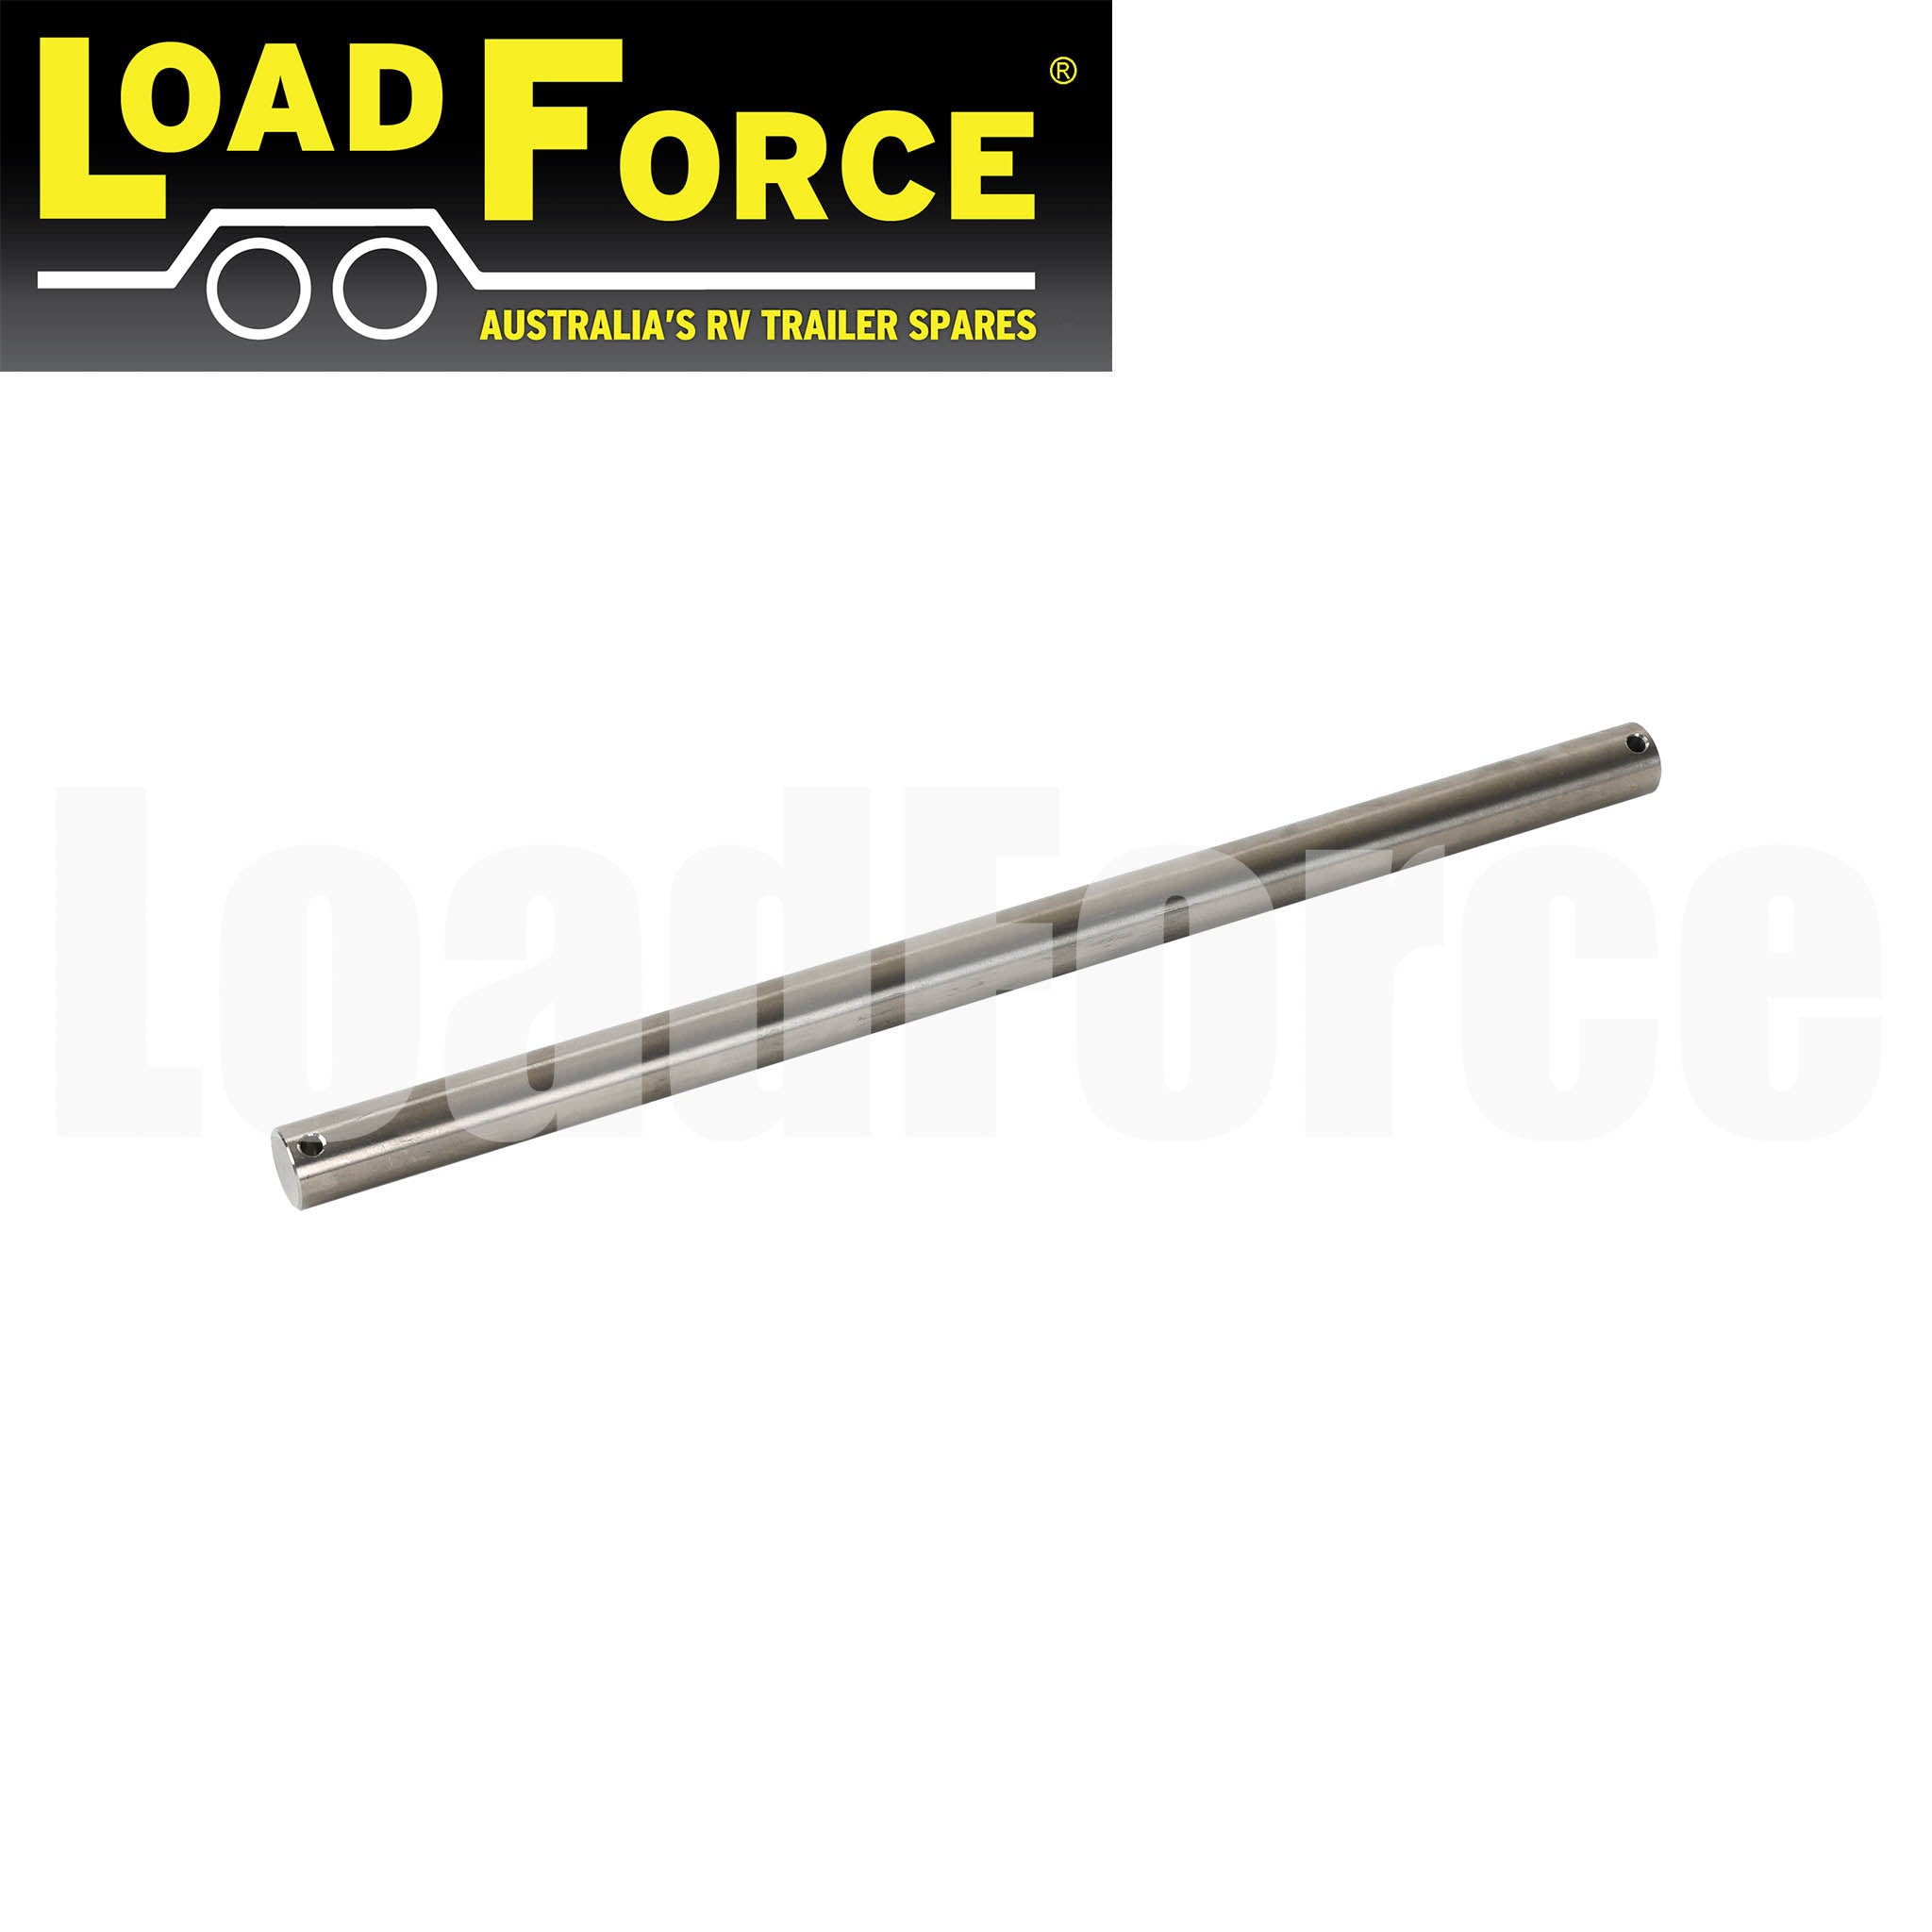 Boat Trailer Roller Spindle 18x340mm Stainless Steel